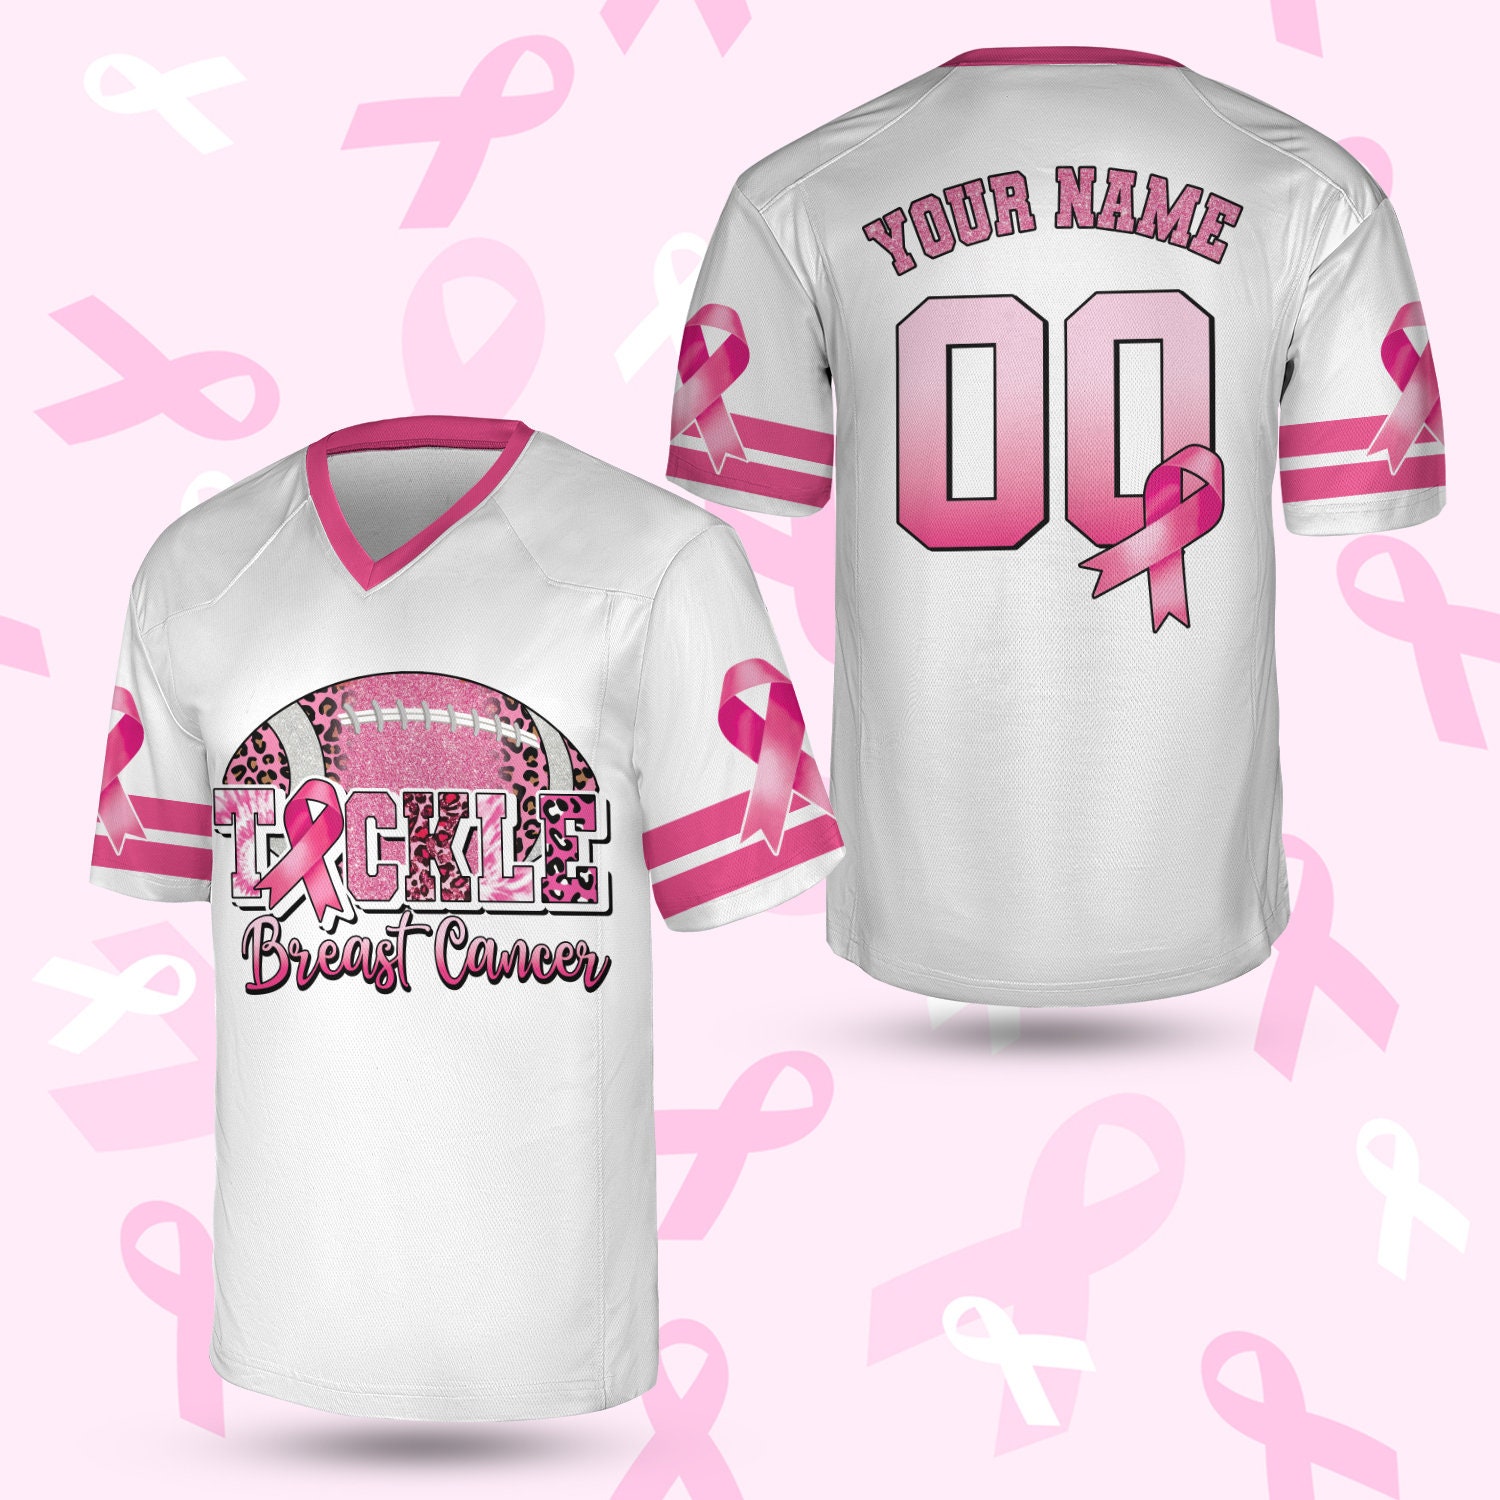 OA Apparel Breast Cancer Awareness - Fight Club - Short Sleeve Jersey - Black (Customized Buy-In) YL